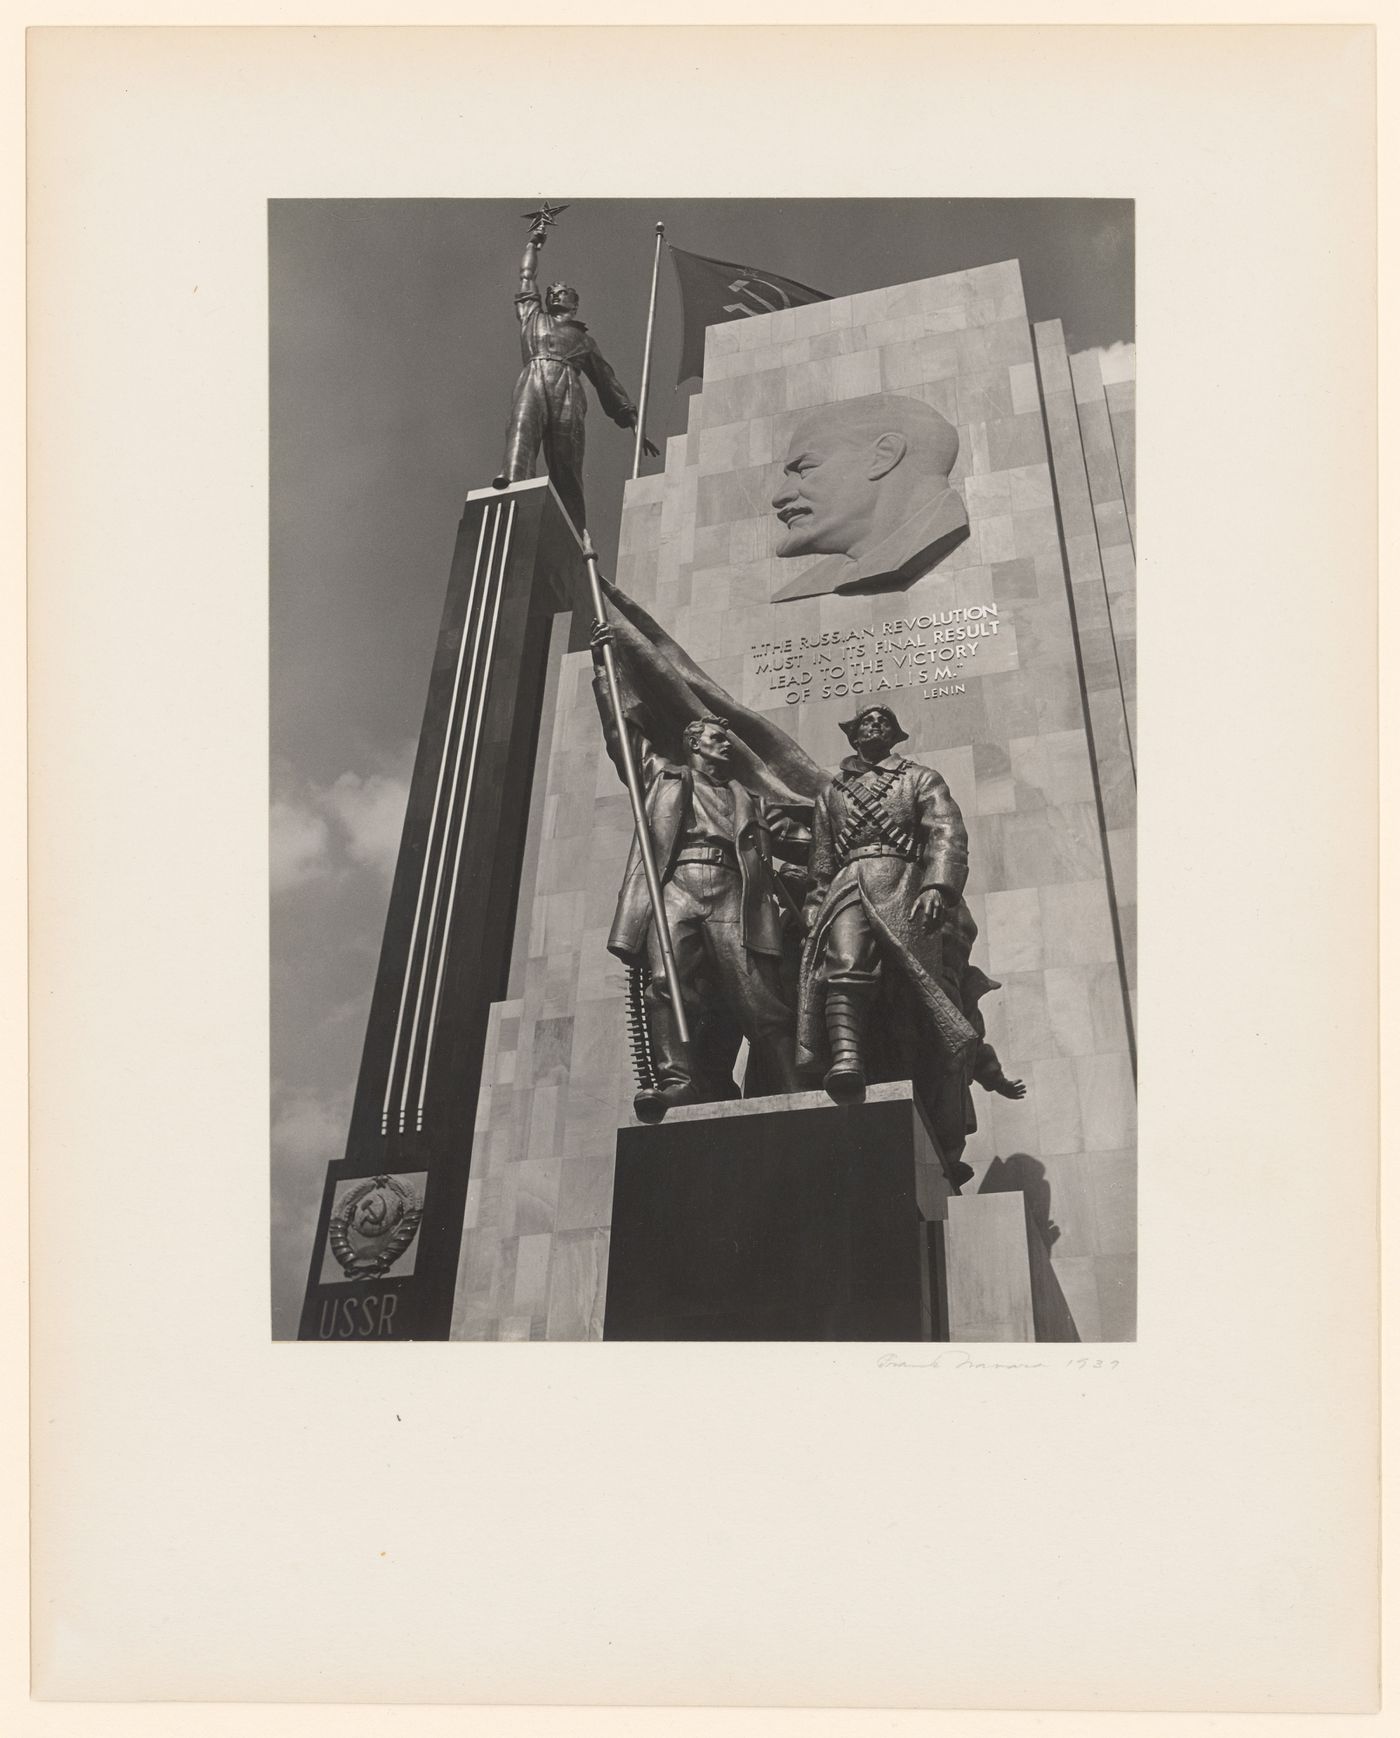 Partial view of the principal façade of the Soviet Pavilion at the New York World's Fair (1939-1940), showing a bas-relief of Lenin and statues of workers and a soldier, New York City